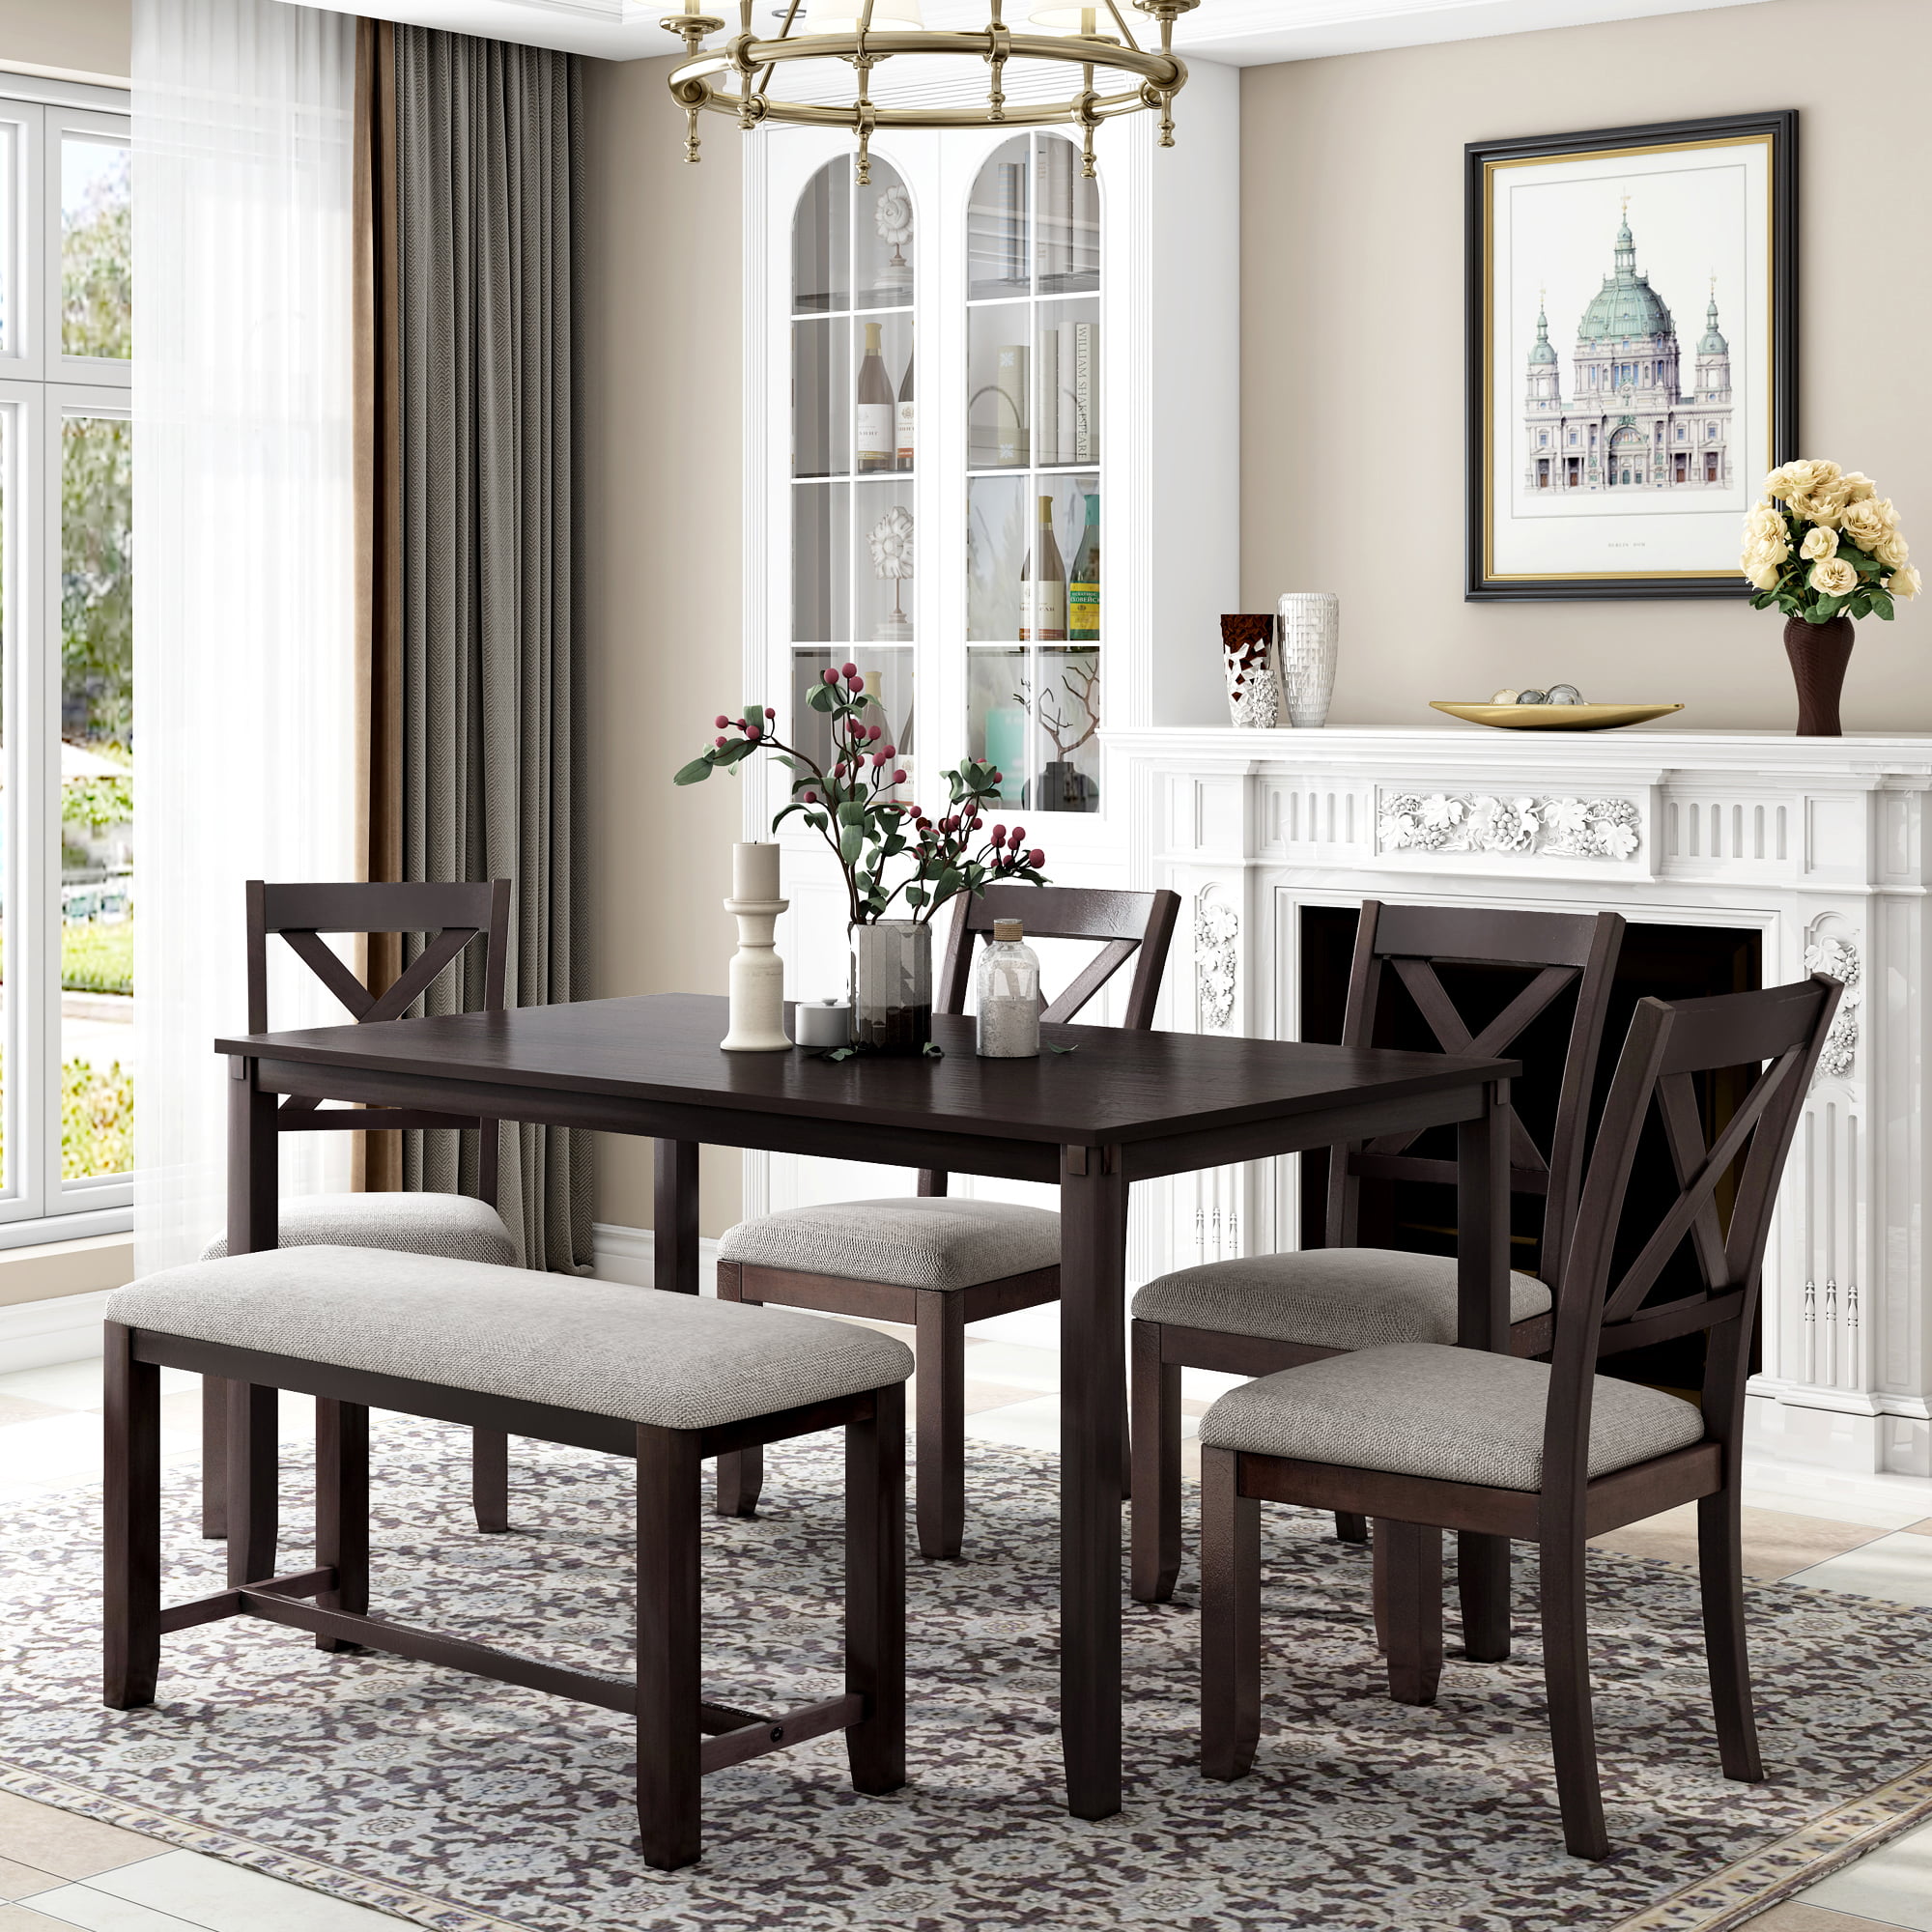 Wood Dining Table And Chair Set Of 6, Dining Room Table And Chairs Set Of 6